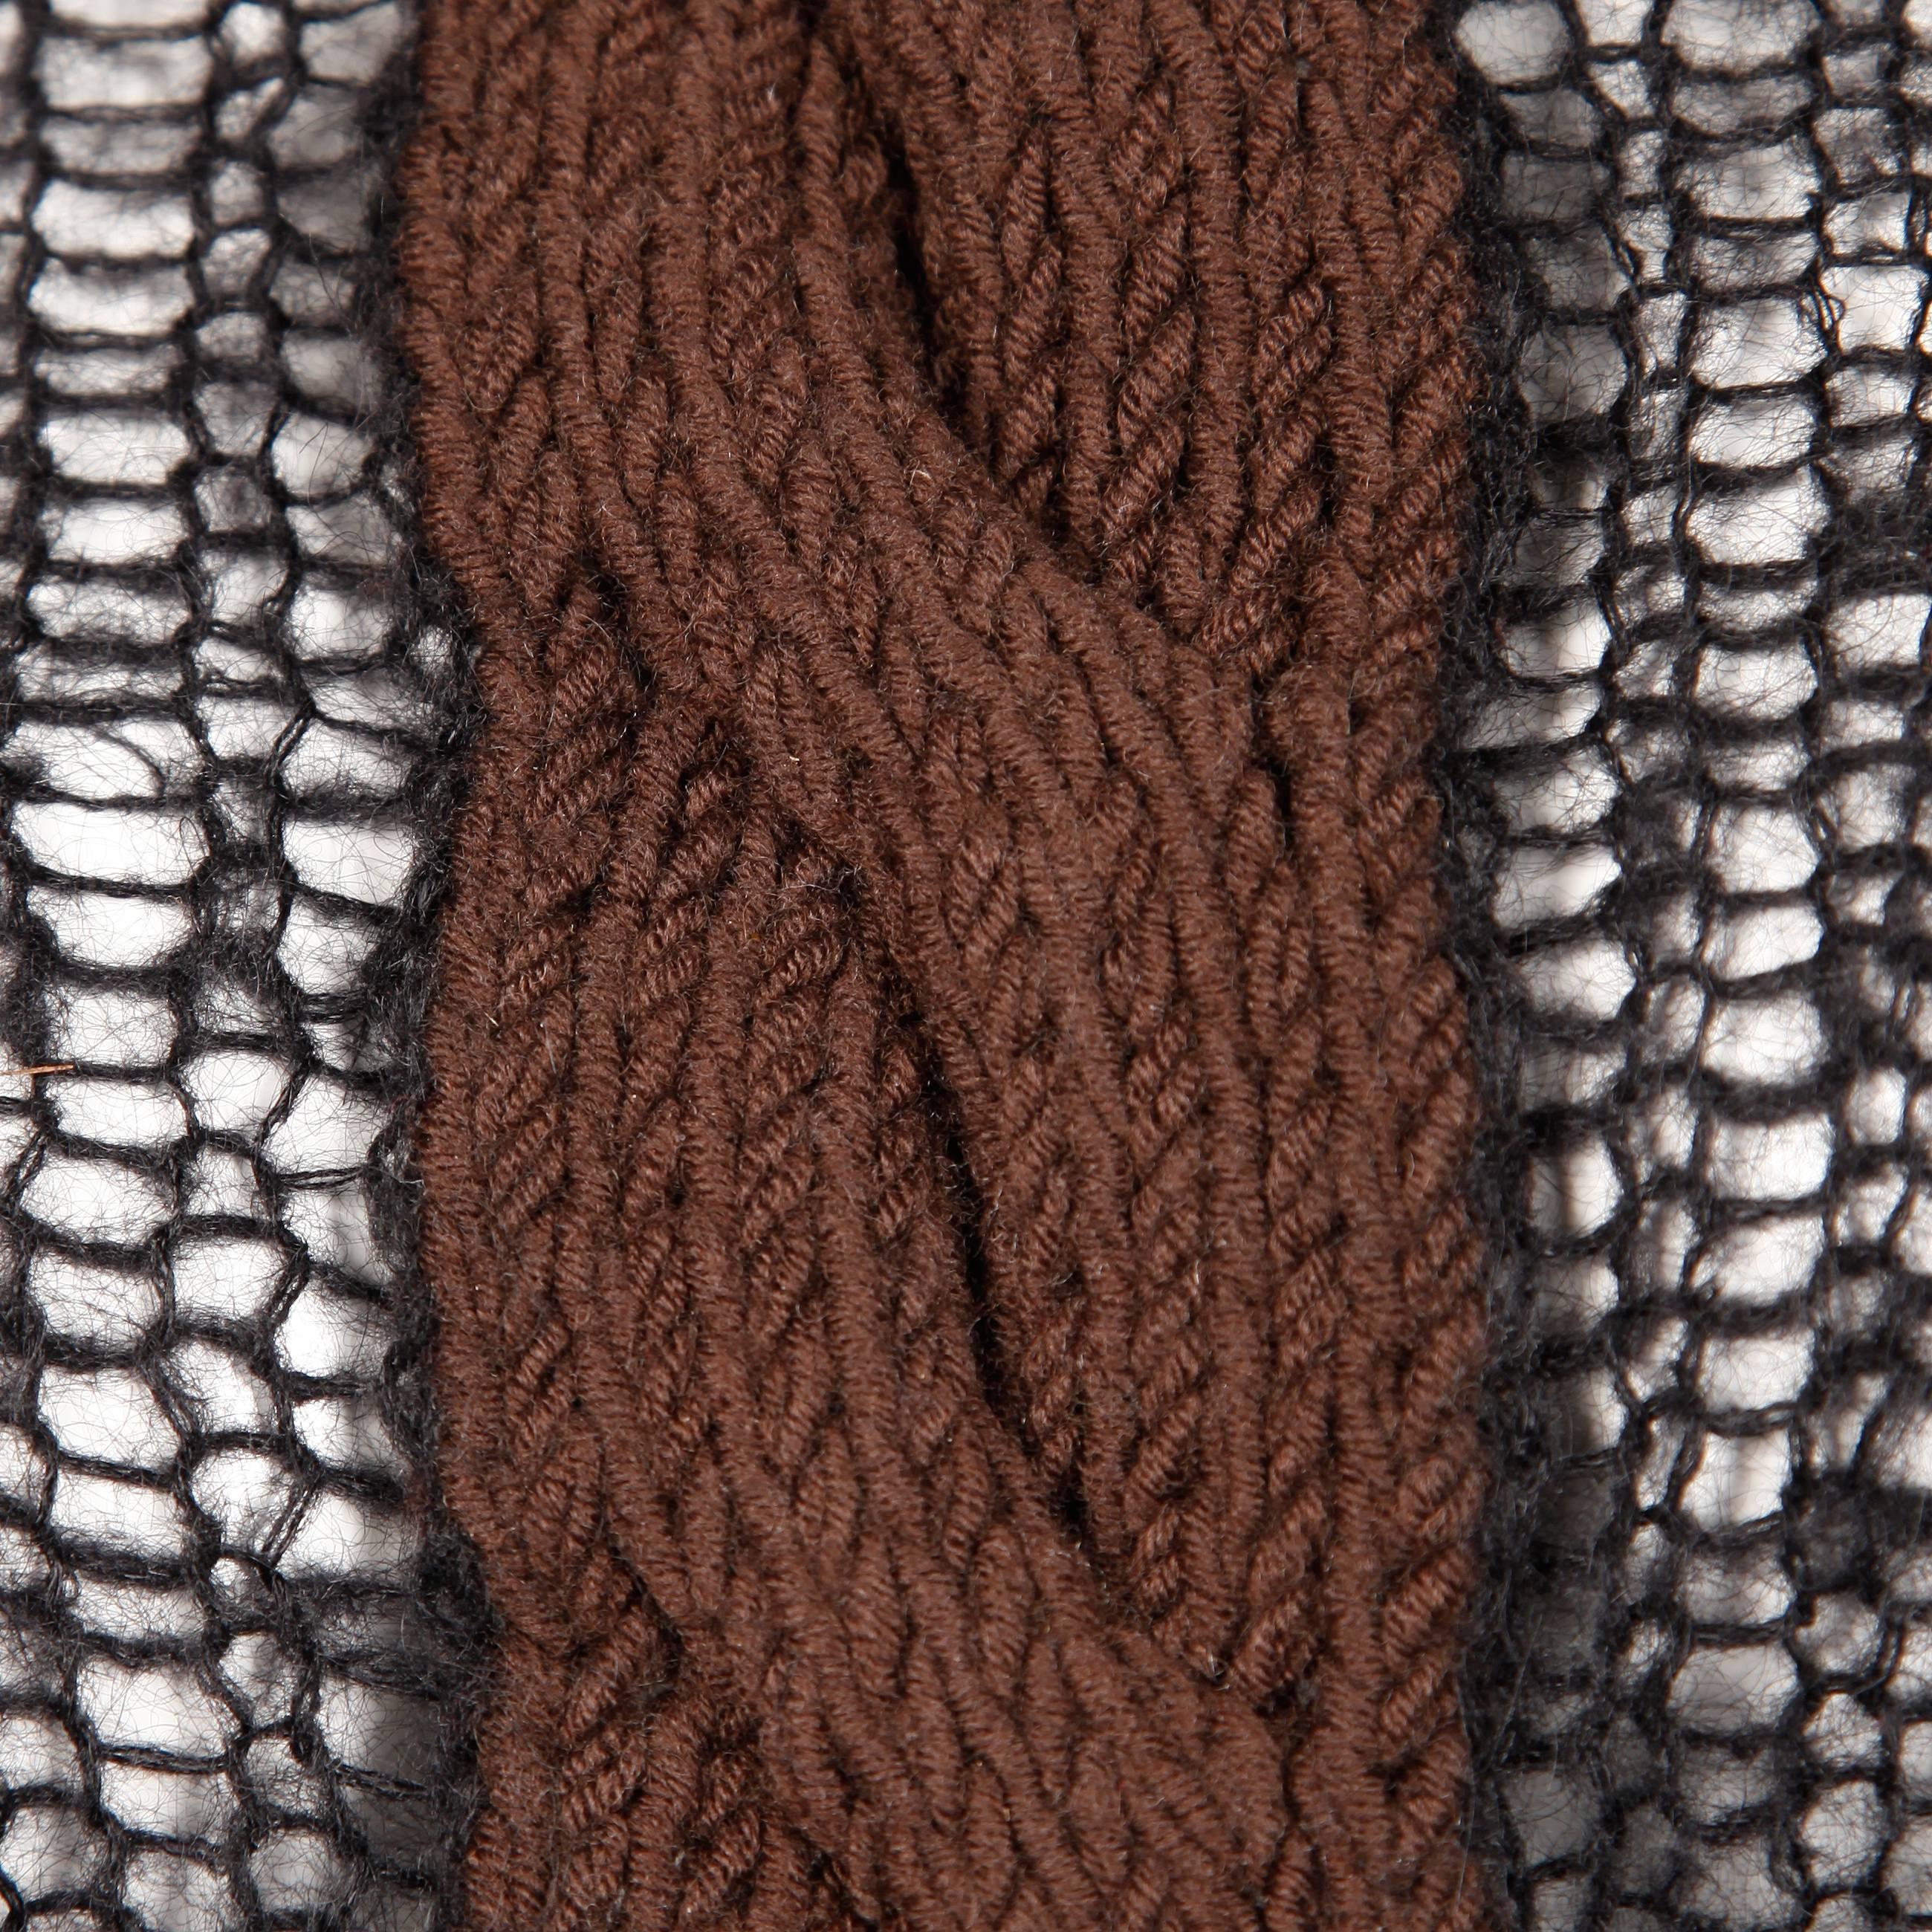 Unique vintage black and brown cable knit halter top sweater by Laura Biagiotti. The top is unlined and is see through on the black portion of the knit. It ties up the back (fully adjustable fit) and buttons on the back of the neck with three